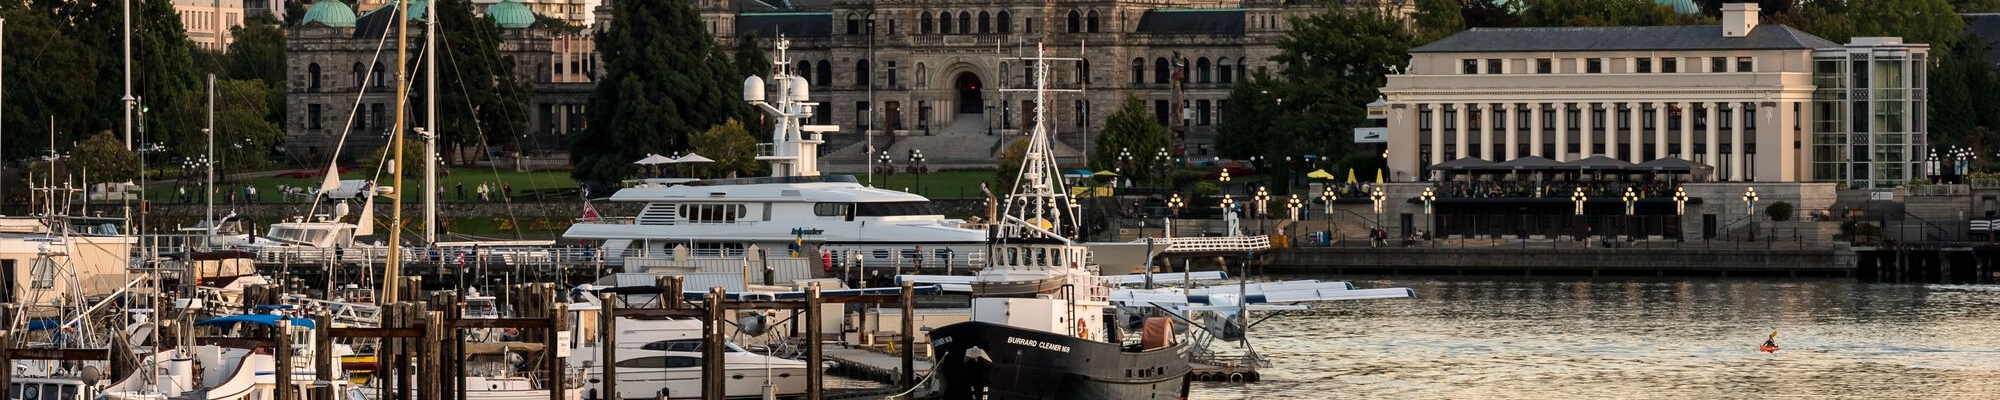 A water taxi moves through the water on the right with a marina on the left of the frame. Buildings are visible in the background, including the intricate legislature.